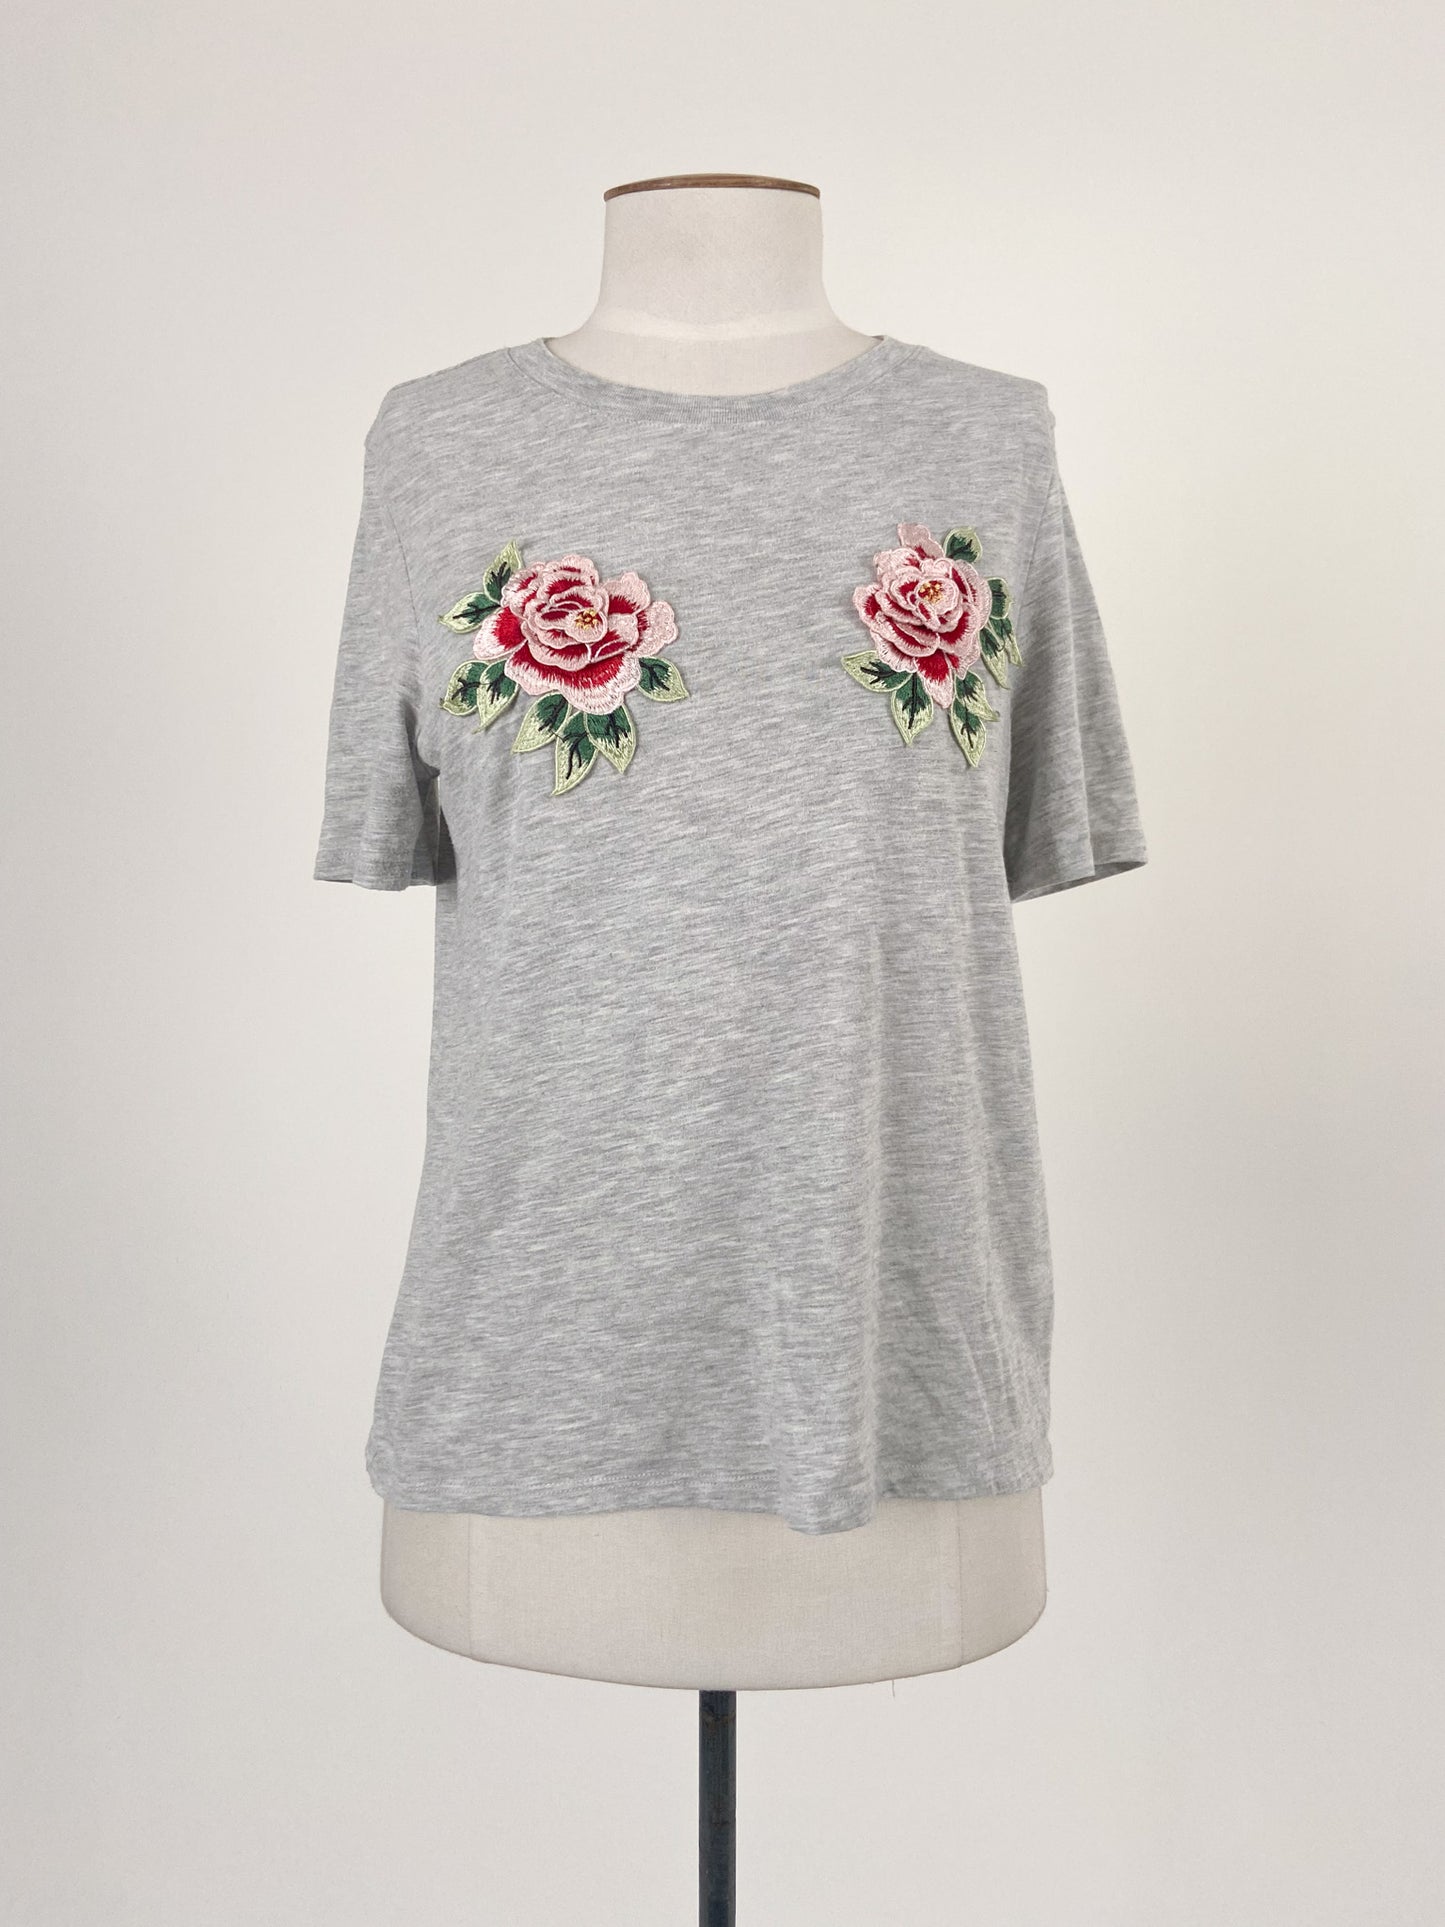 H&M | Grey Casual Top | Size XS